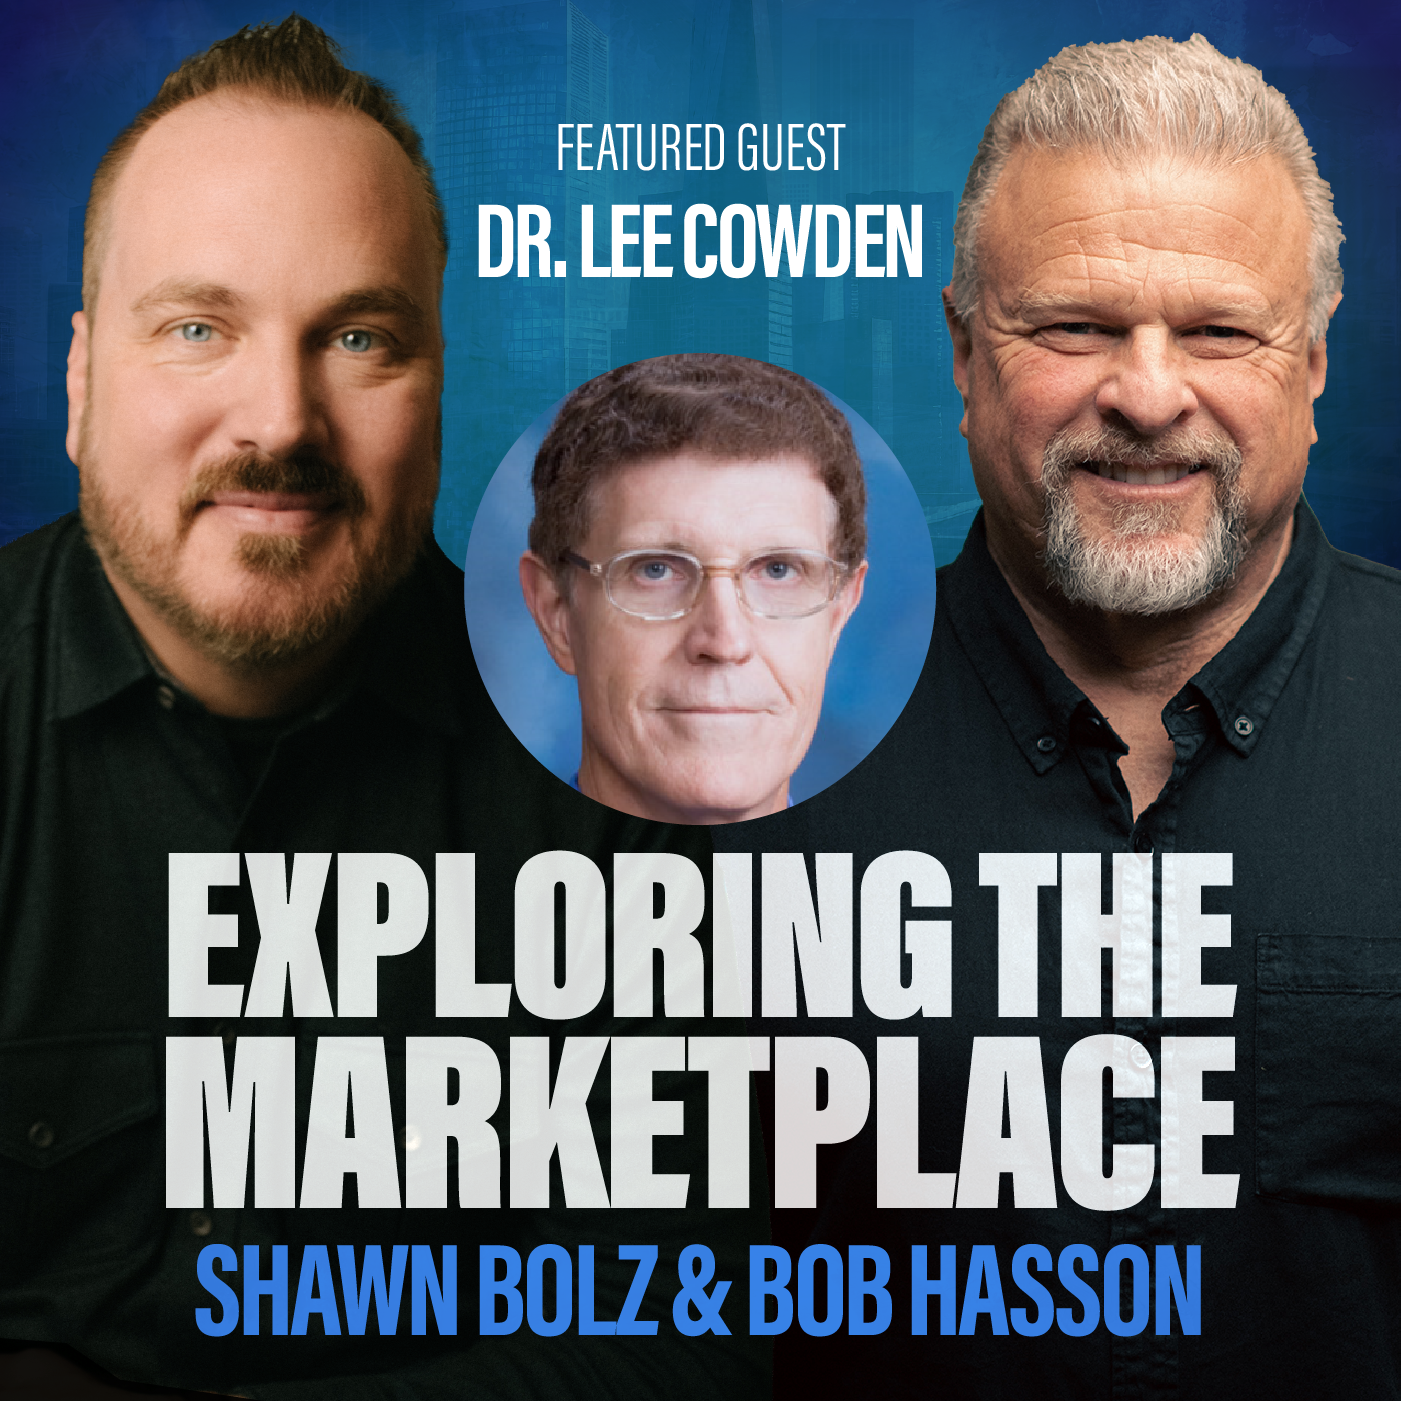 Faith Over Fear: Navigating Job Loss and Layoffs with Dr. Lee Cowden on Exploring the Marketplace (S:4 - Ep 1)